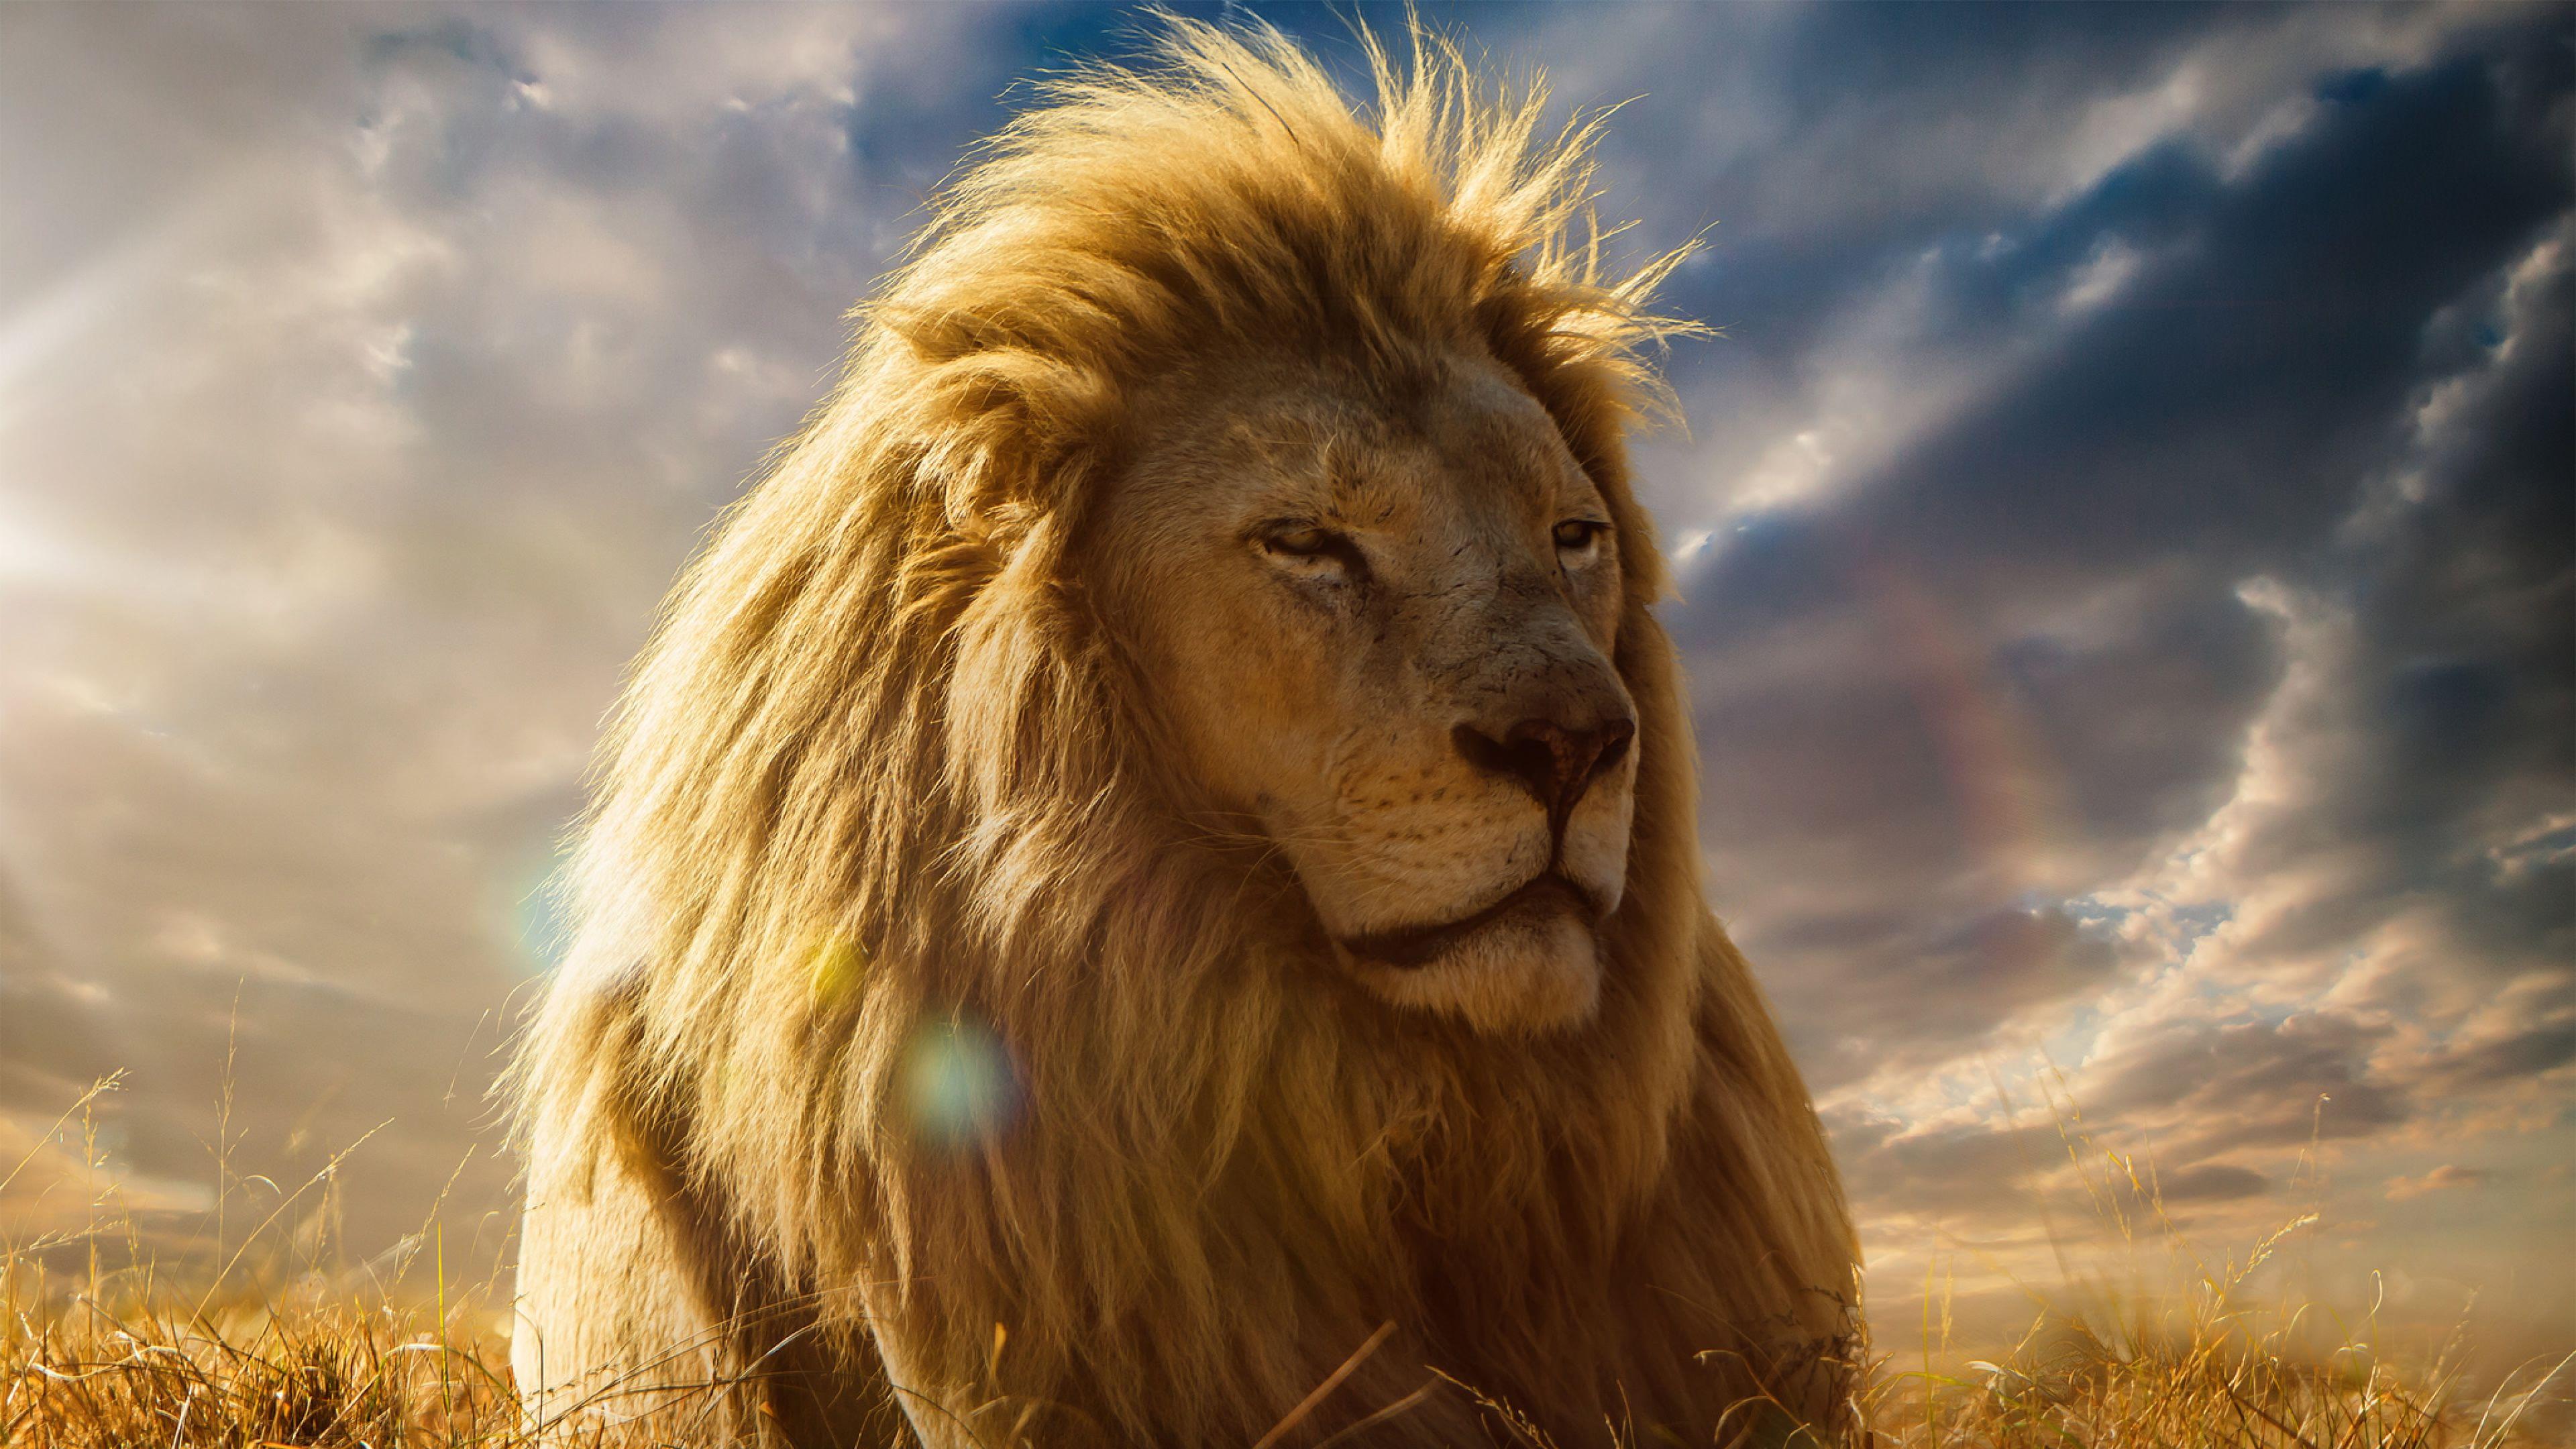 Lion King 4k Wallpapers Top Free Lion King 4k Backgrounds